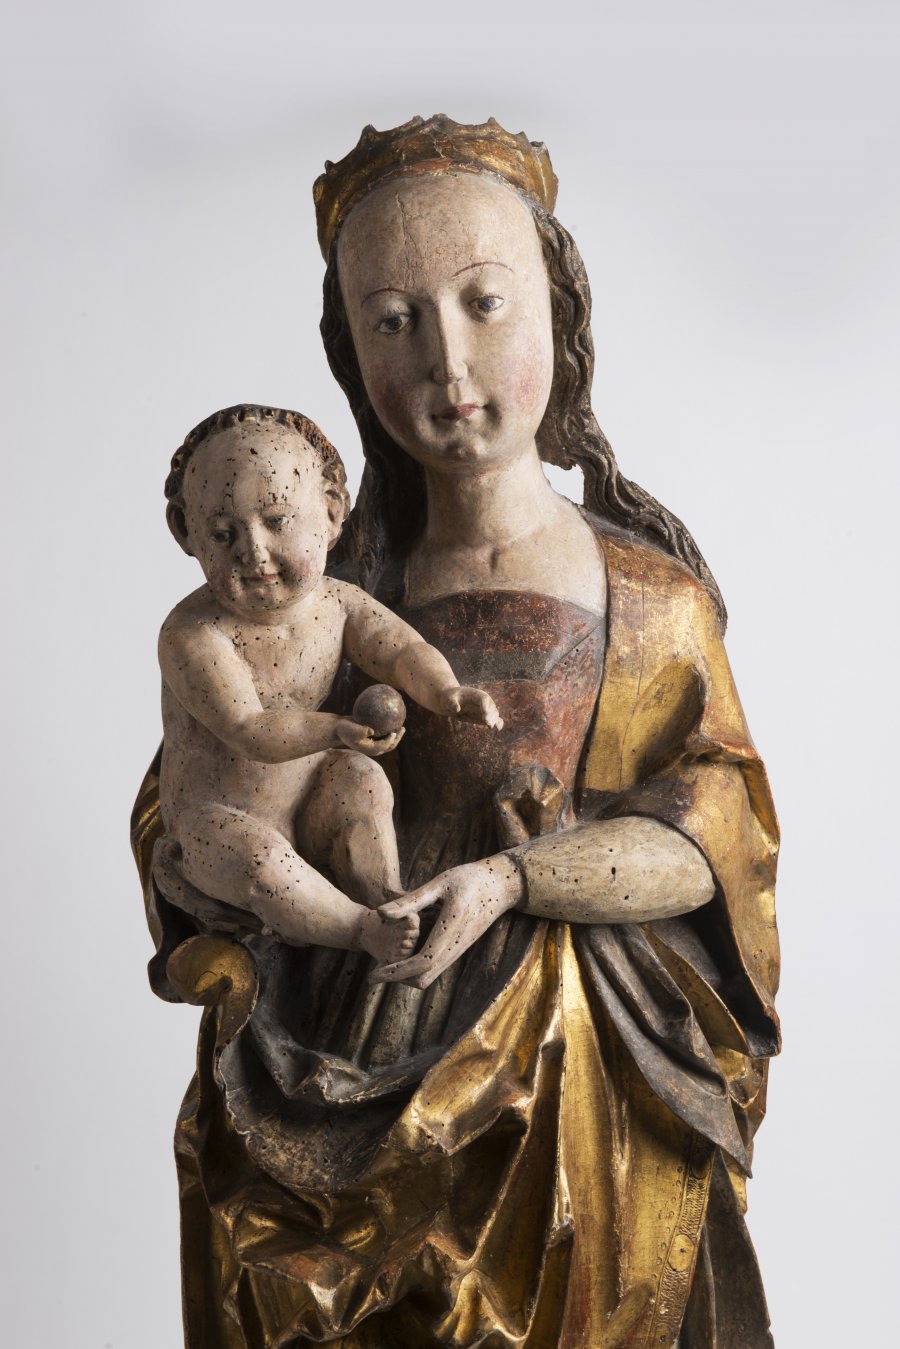 A LATE GOTHIC MADONNA